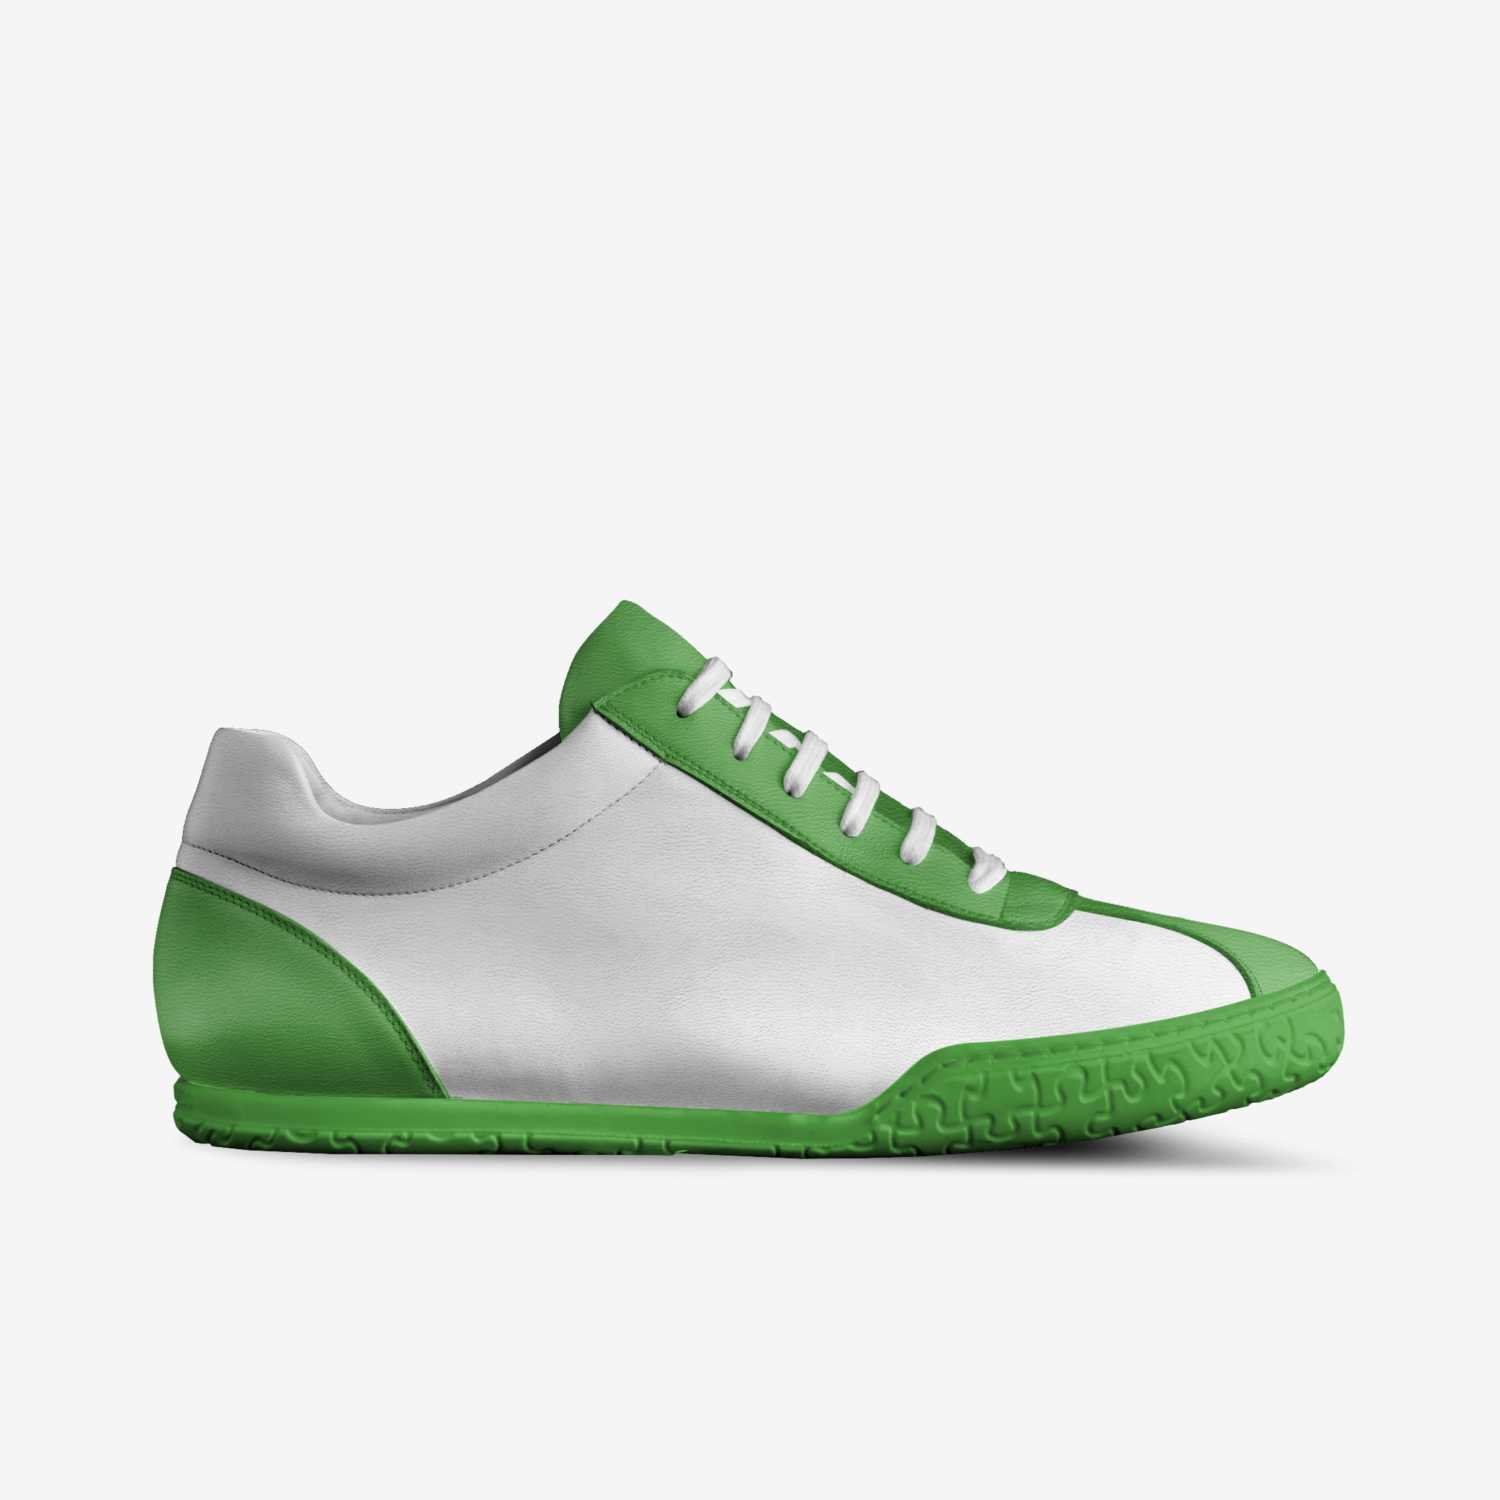 Celtic fc custom made in Italy shoes by Kevin Sharp | Side view